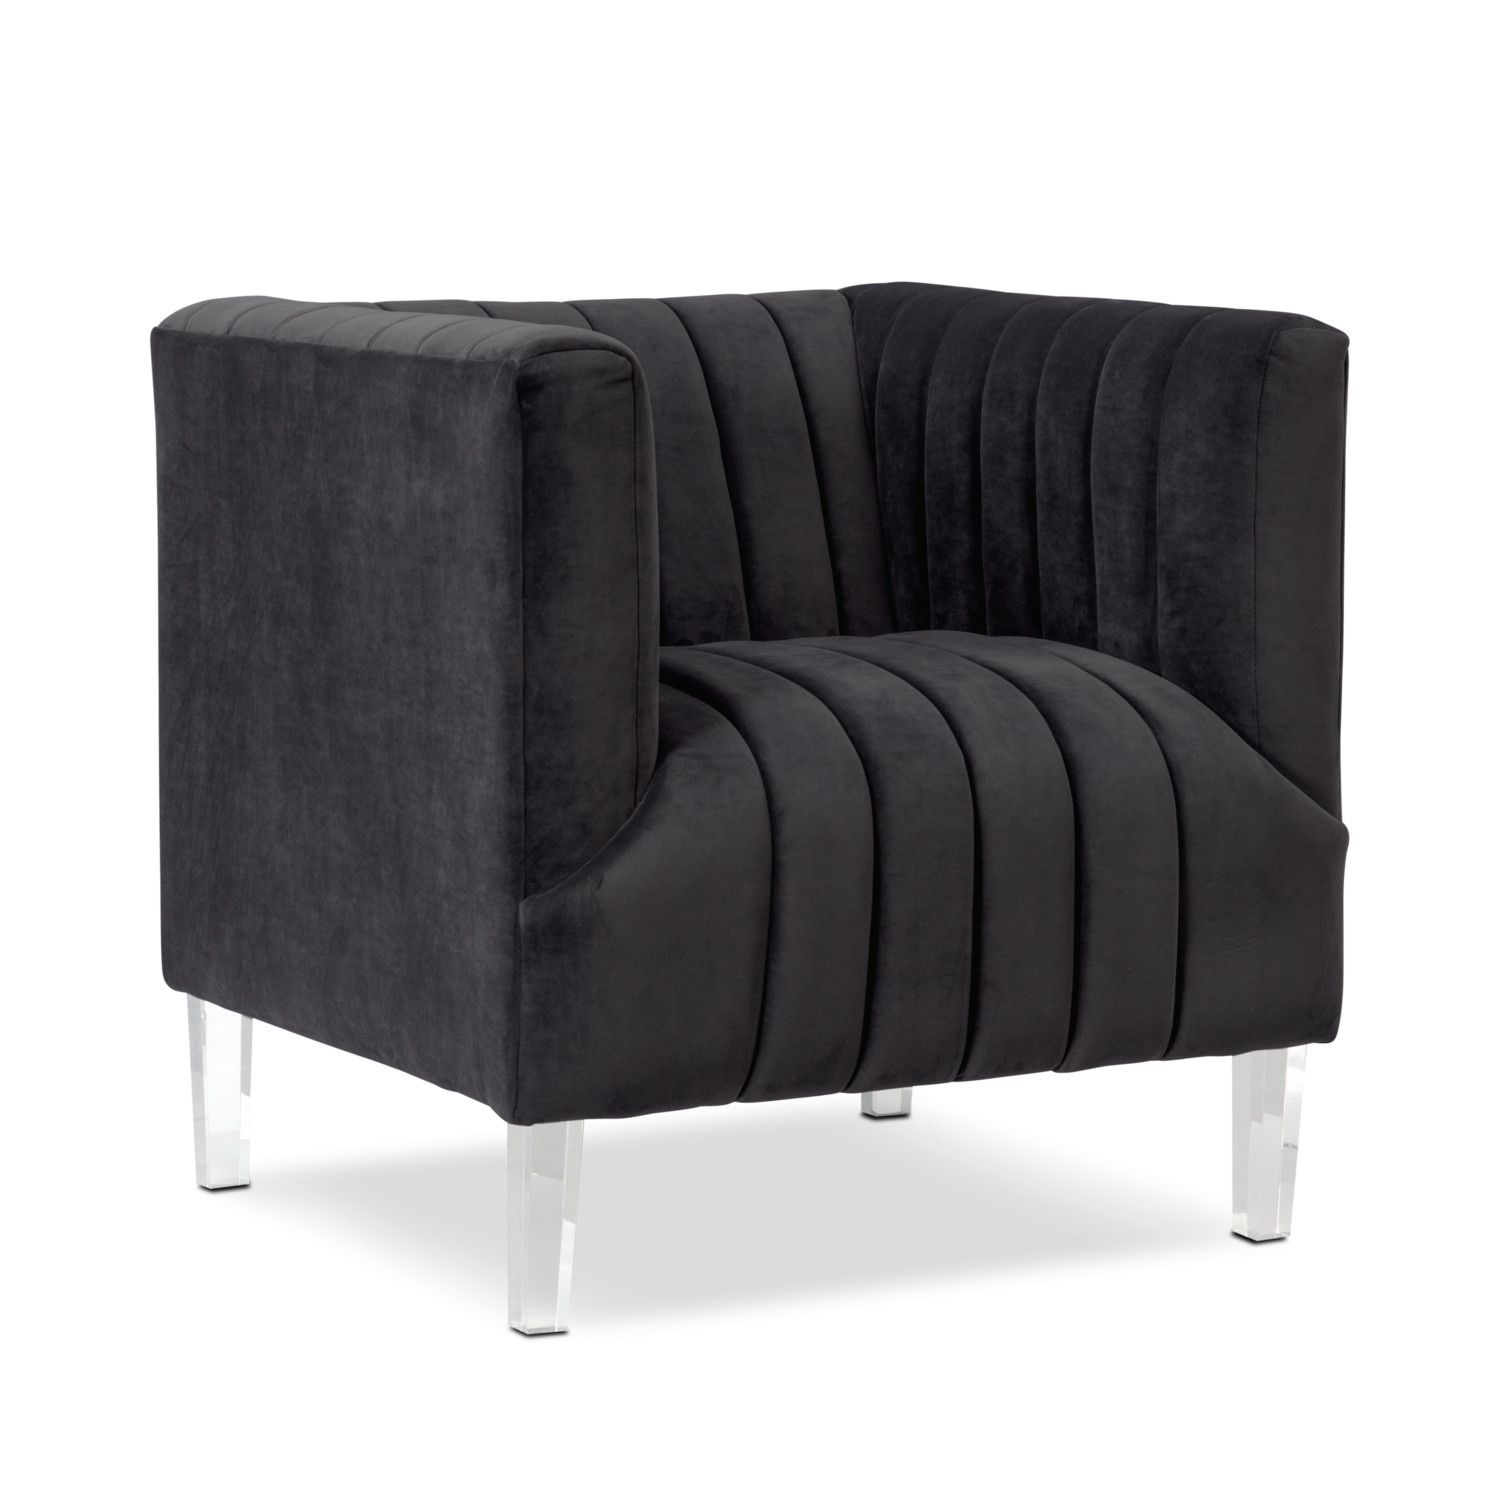 Calle Accent Chair – Gunmetal | Value City Furniture And Mattresses With Regard To Loft Black Swivel Accent Chairs (View 21 of 25)